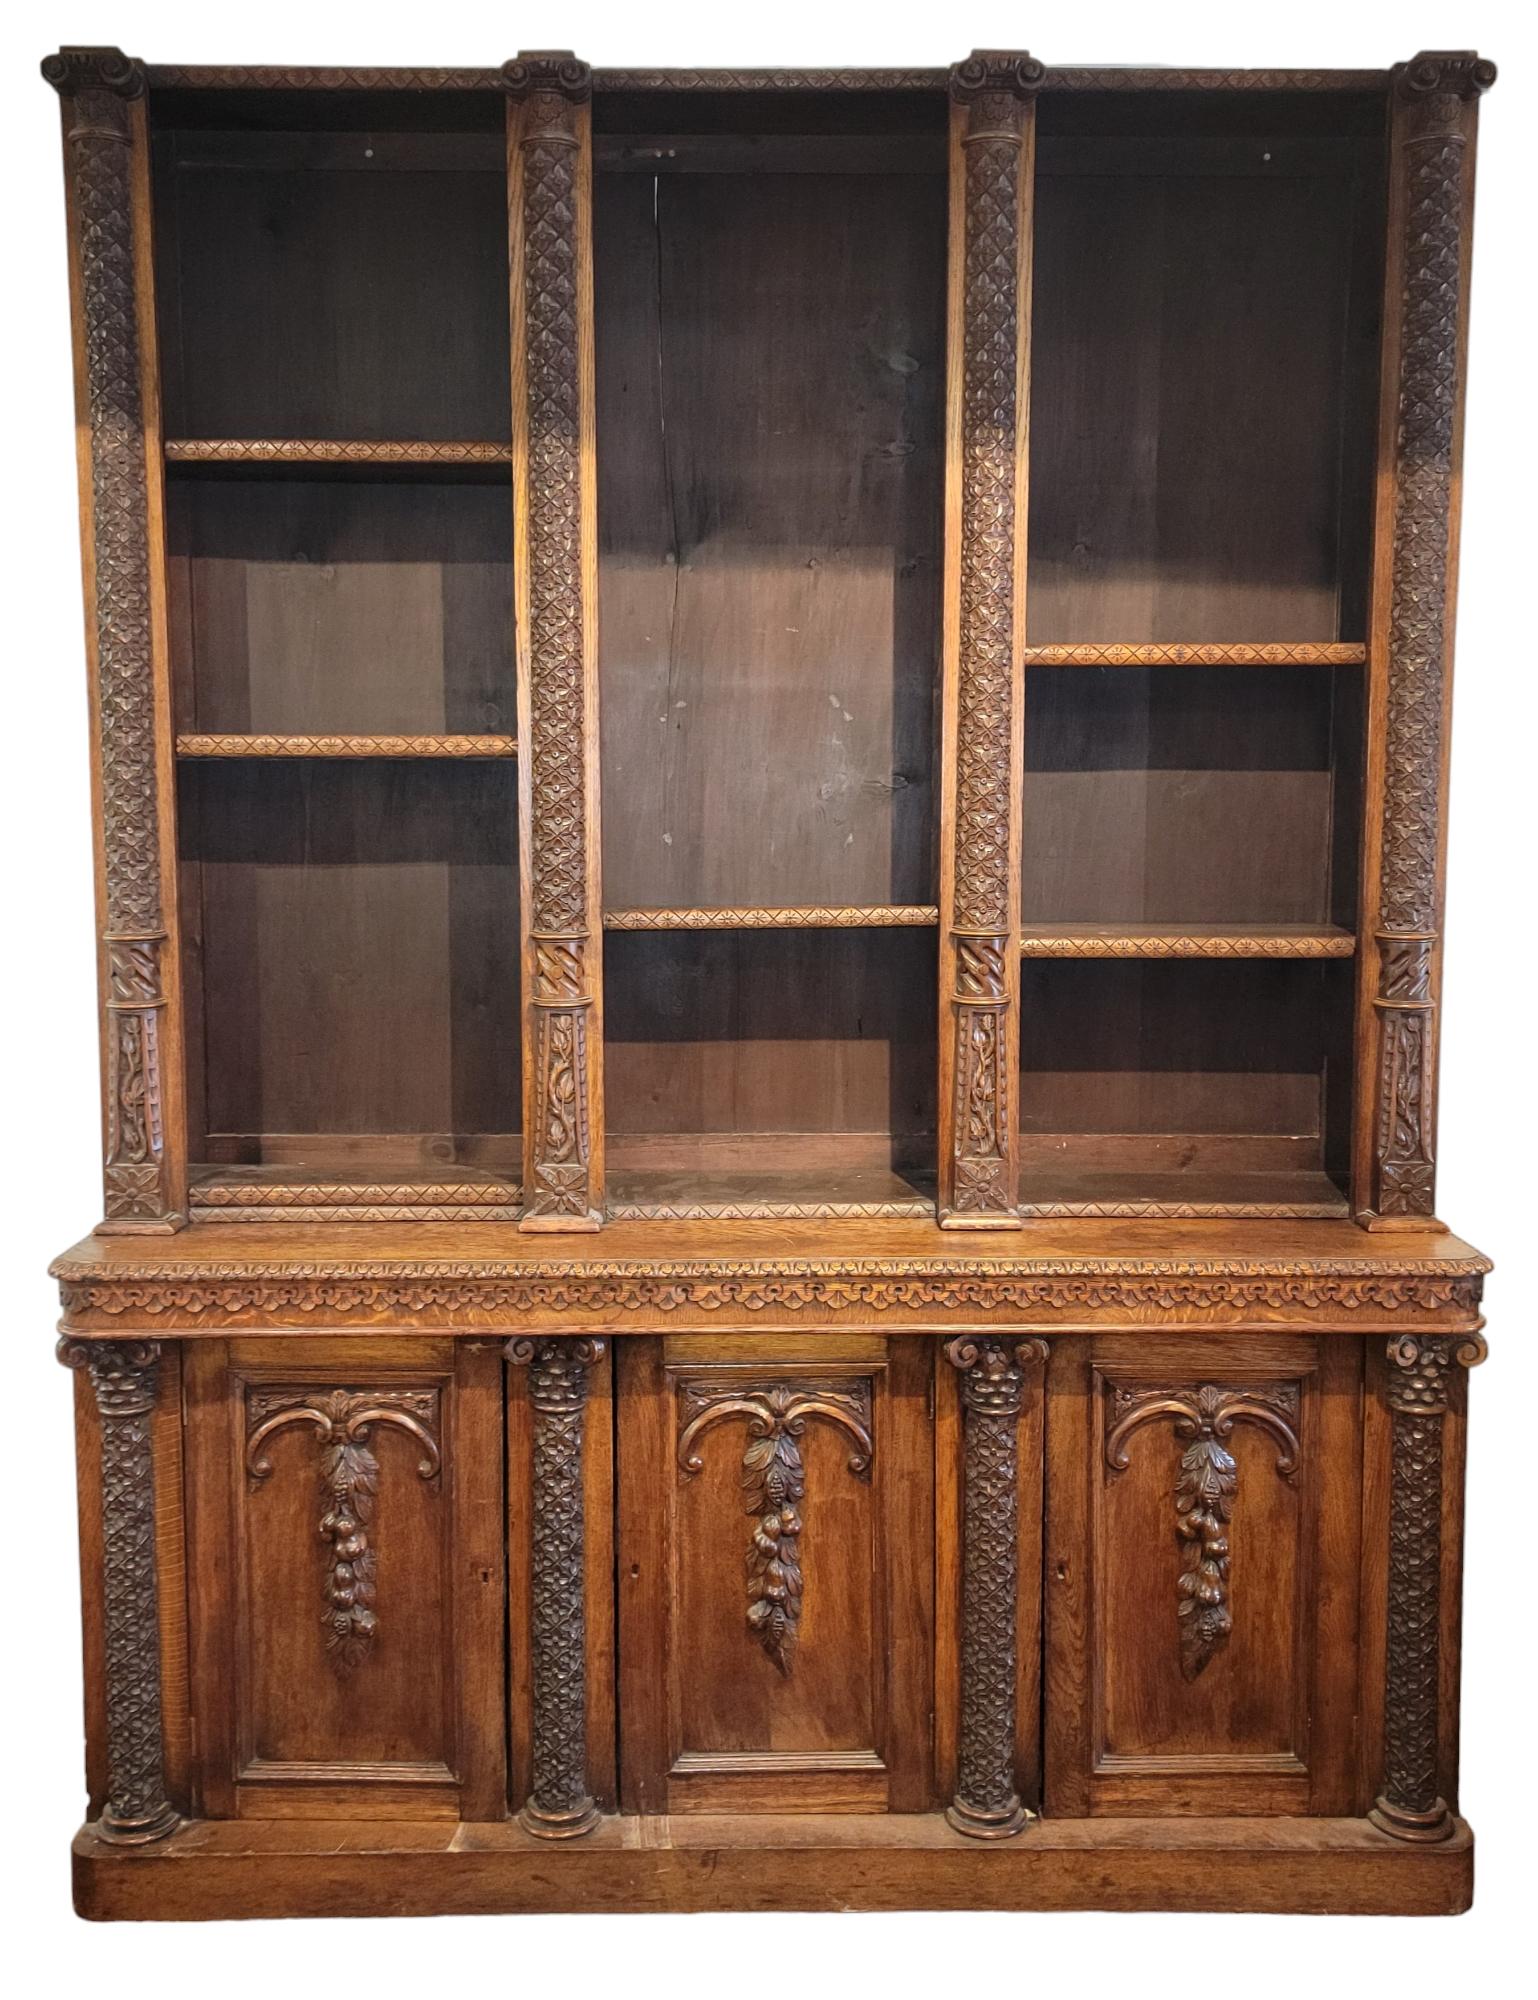 19thc Italian Hand Carved Bookcase Commode. The shelves are adjustable within the top half. The bottom half(commode area) has a three door cabinet style to them and house one shelving each. Lots of space with a great carved look. Measures approx -